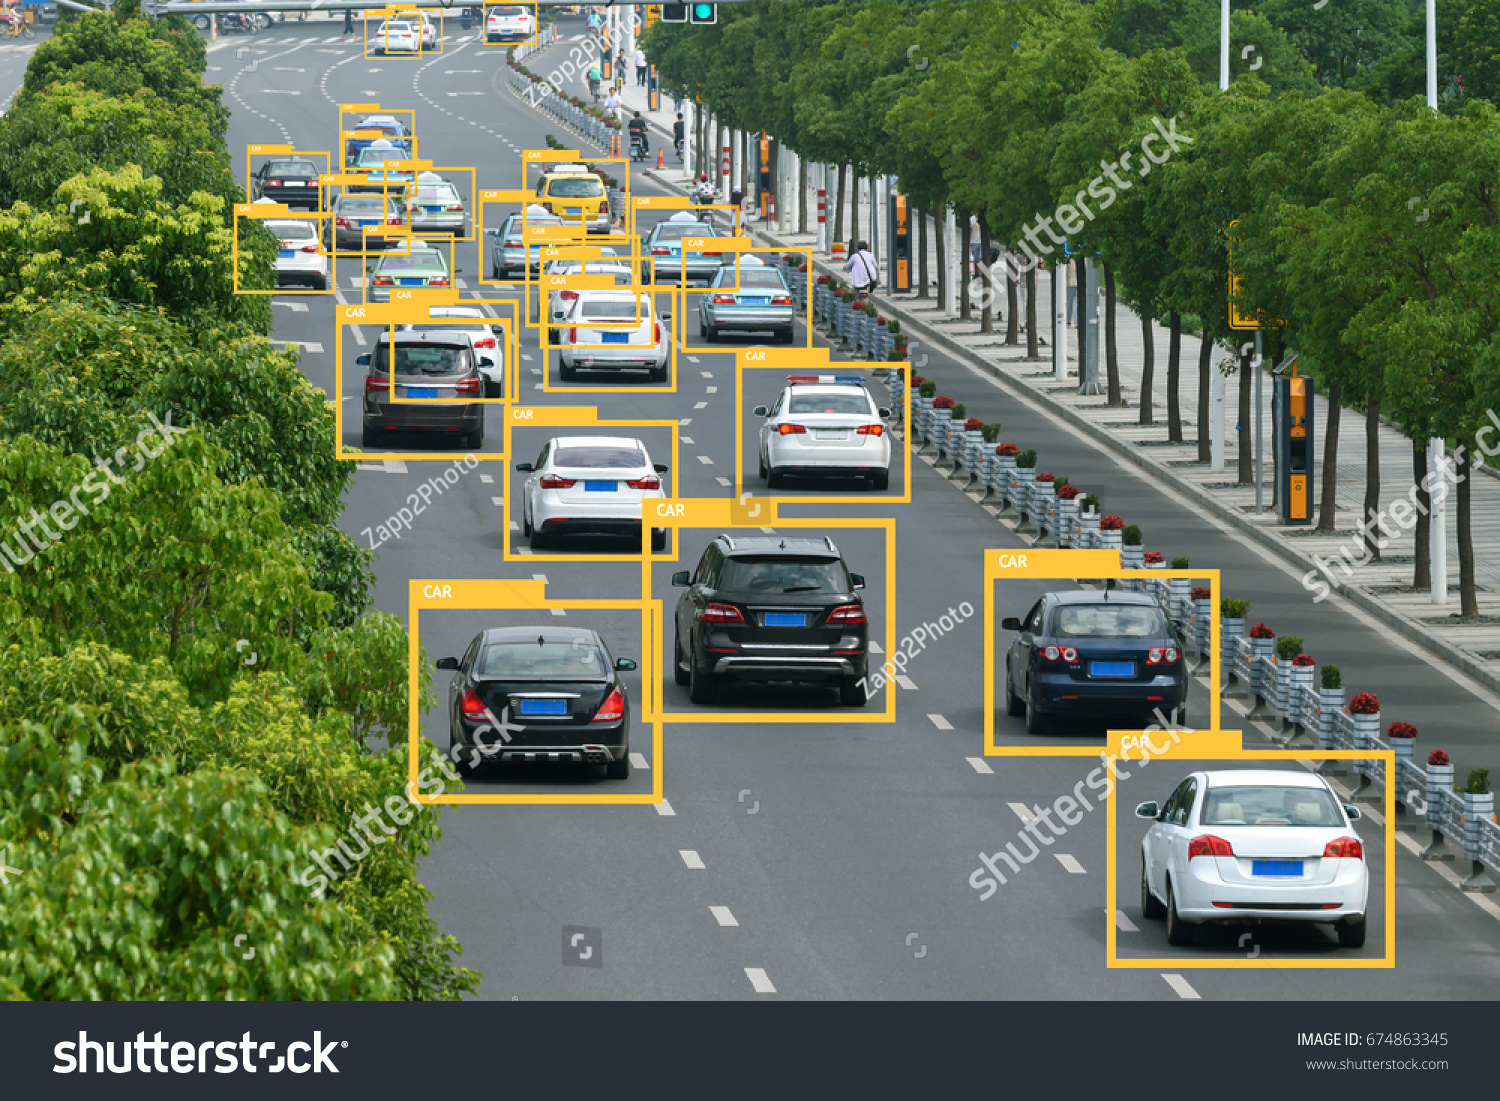 Machine learning analytics identify vehicles technology , Artificial intelligence concept. Software ui analytics and recognition cars vehicles in city.
 #674863345